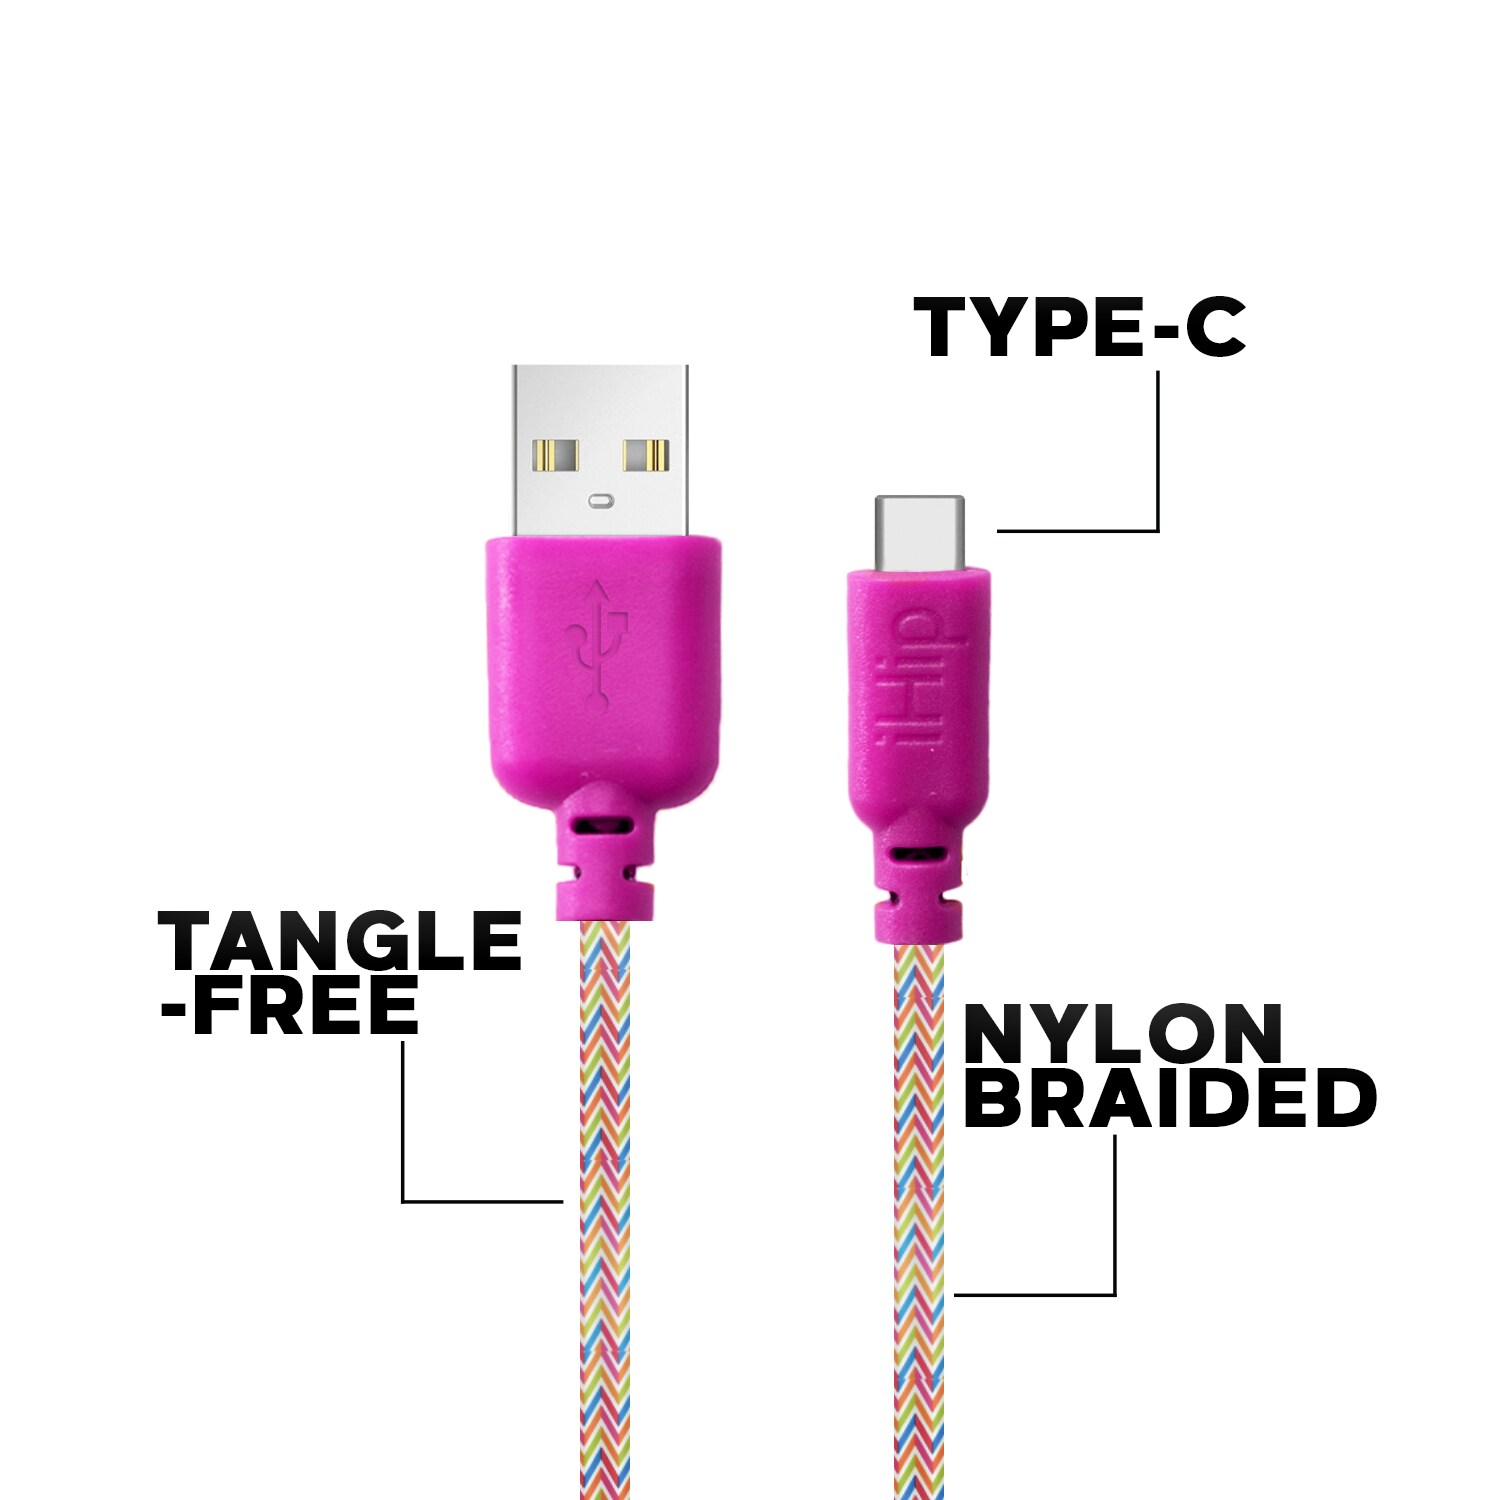 Snor Net zo Gelijkmatig Zeikos iHip Cute Cords 6ft Rainbow Braided Cable Type-C USB Sync Fiber  Finish Bend Test Certified -Android Charger Cable for Android Samsung  Galaxy S9 S10 S8 Plus Note10 9 8, Moto Z,